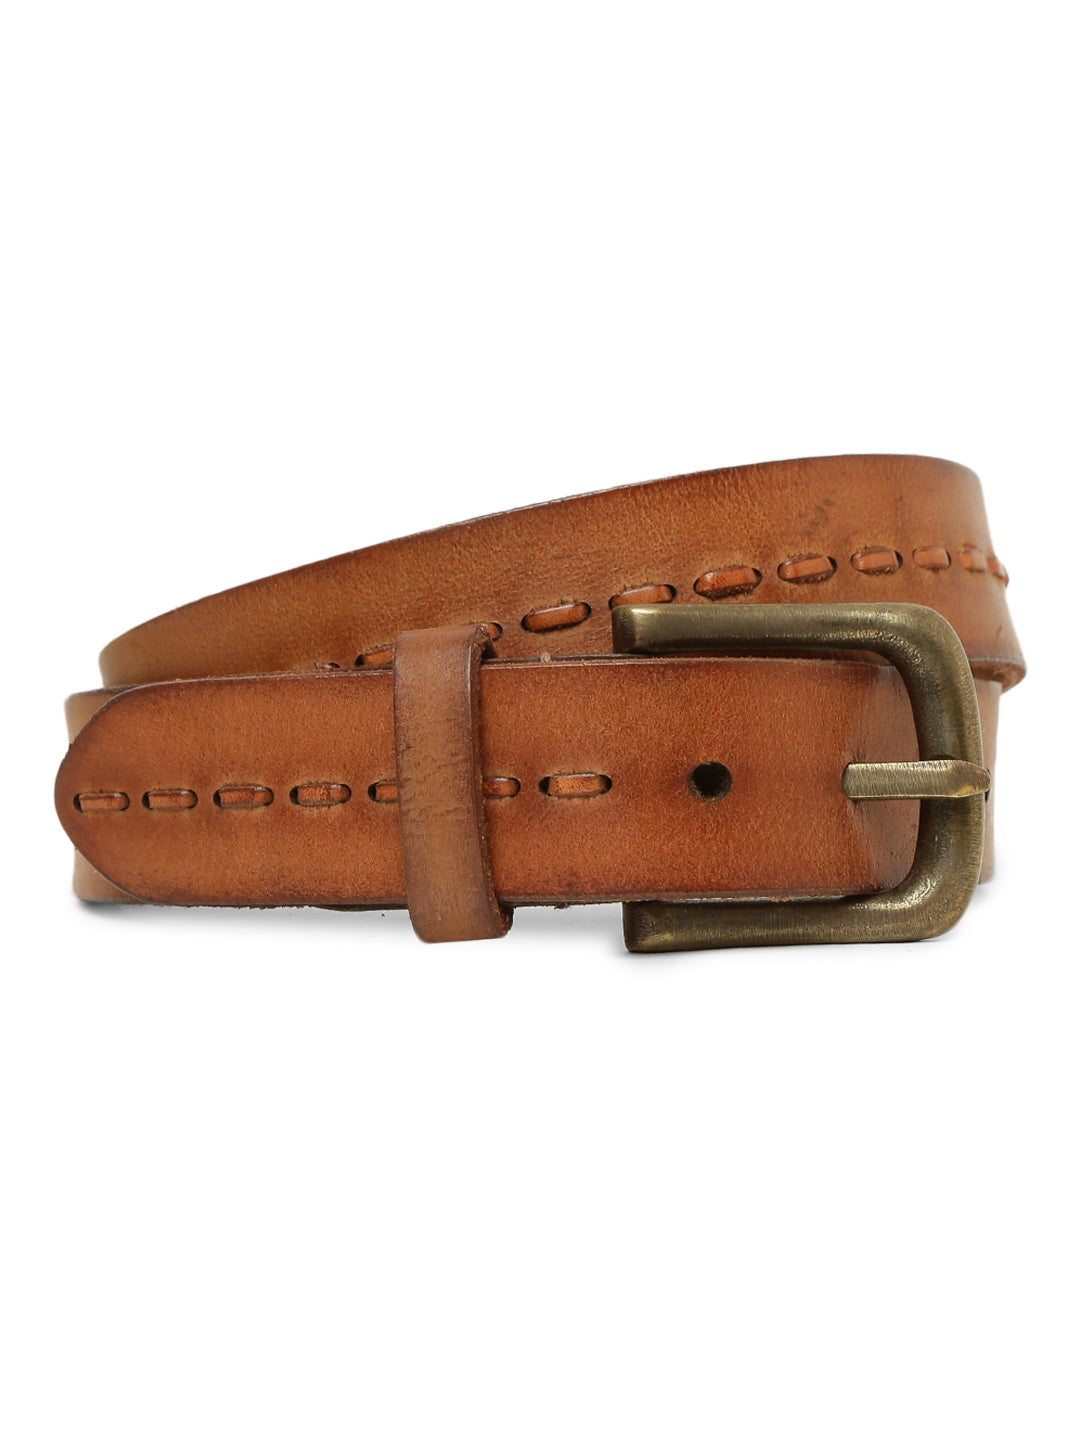 Genuine Tan Leather Crafted Men's Belt